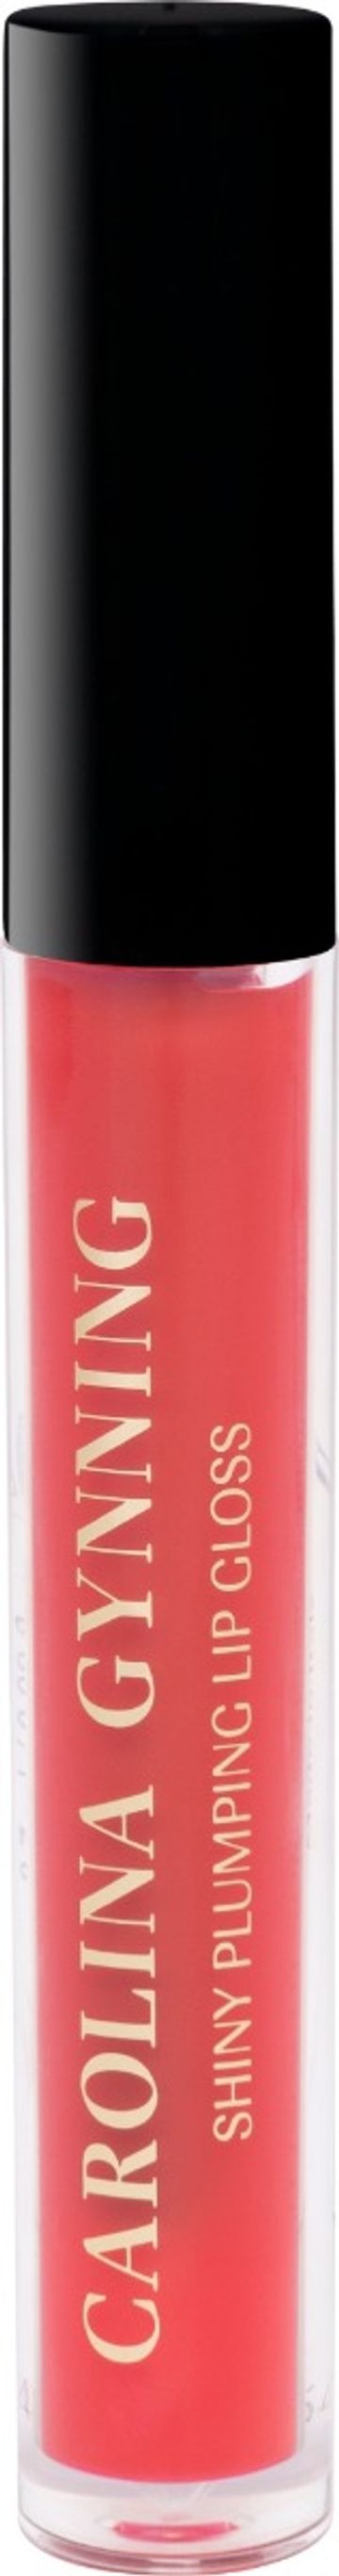 Gynning Lip Gloss shade Cheeky Can I kiss you, Red